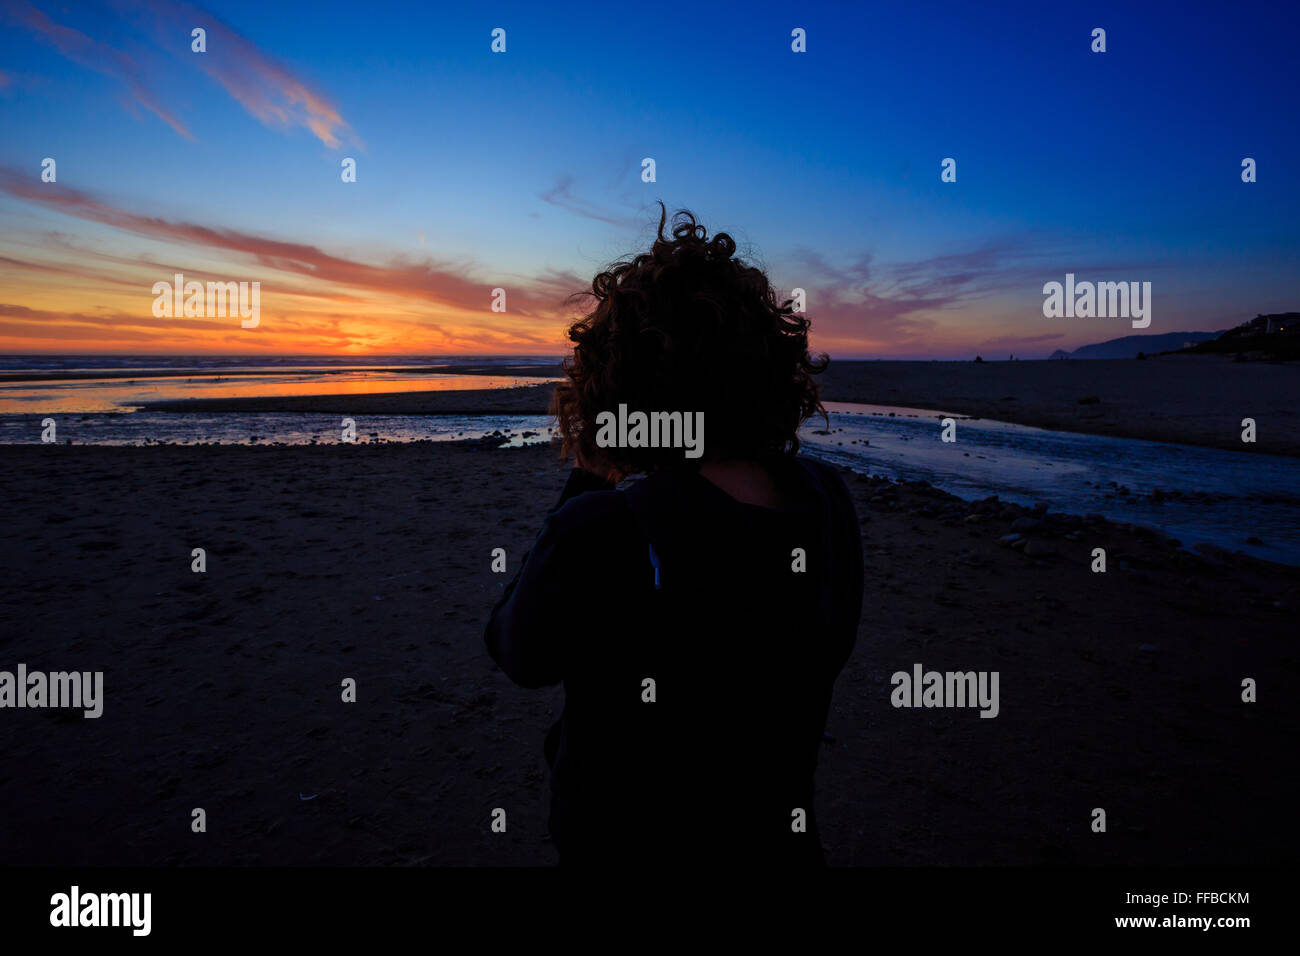 Sunset photos being shot by a woman with a camera on the beach at dusk. Stock Photo